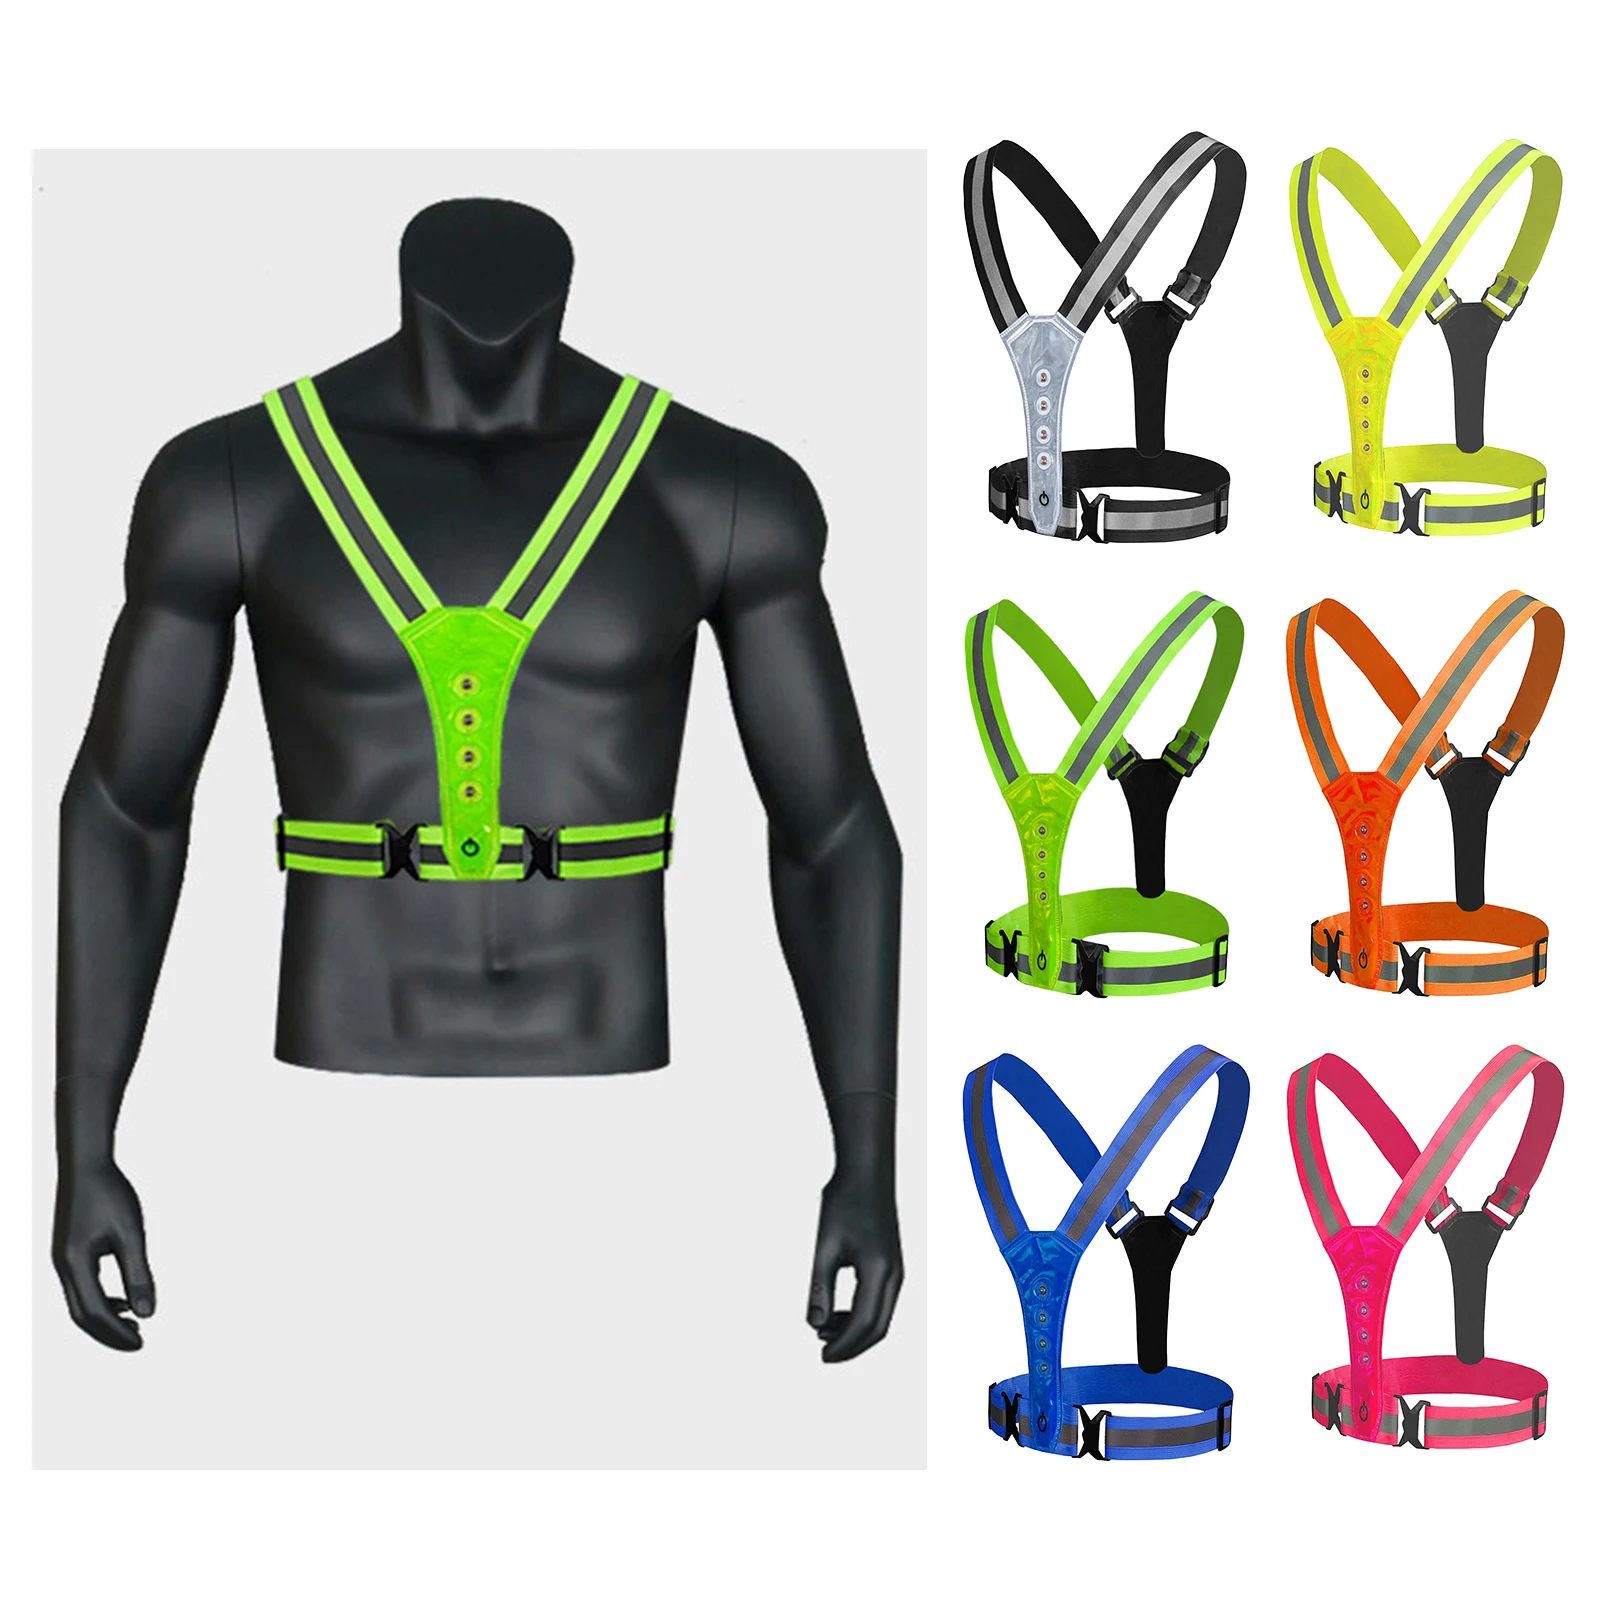 LED Reflective Vest Glowing High Visibility Safety Gear for Night Running Outdoor Dog Walking Hiking